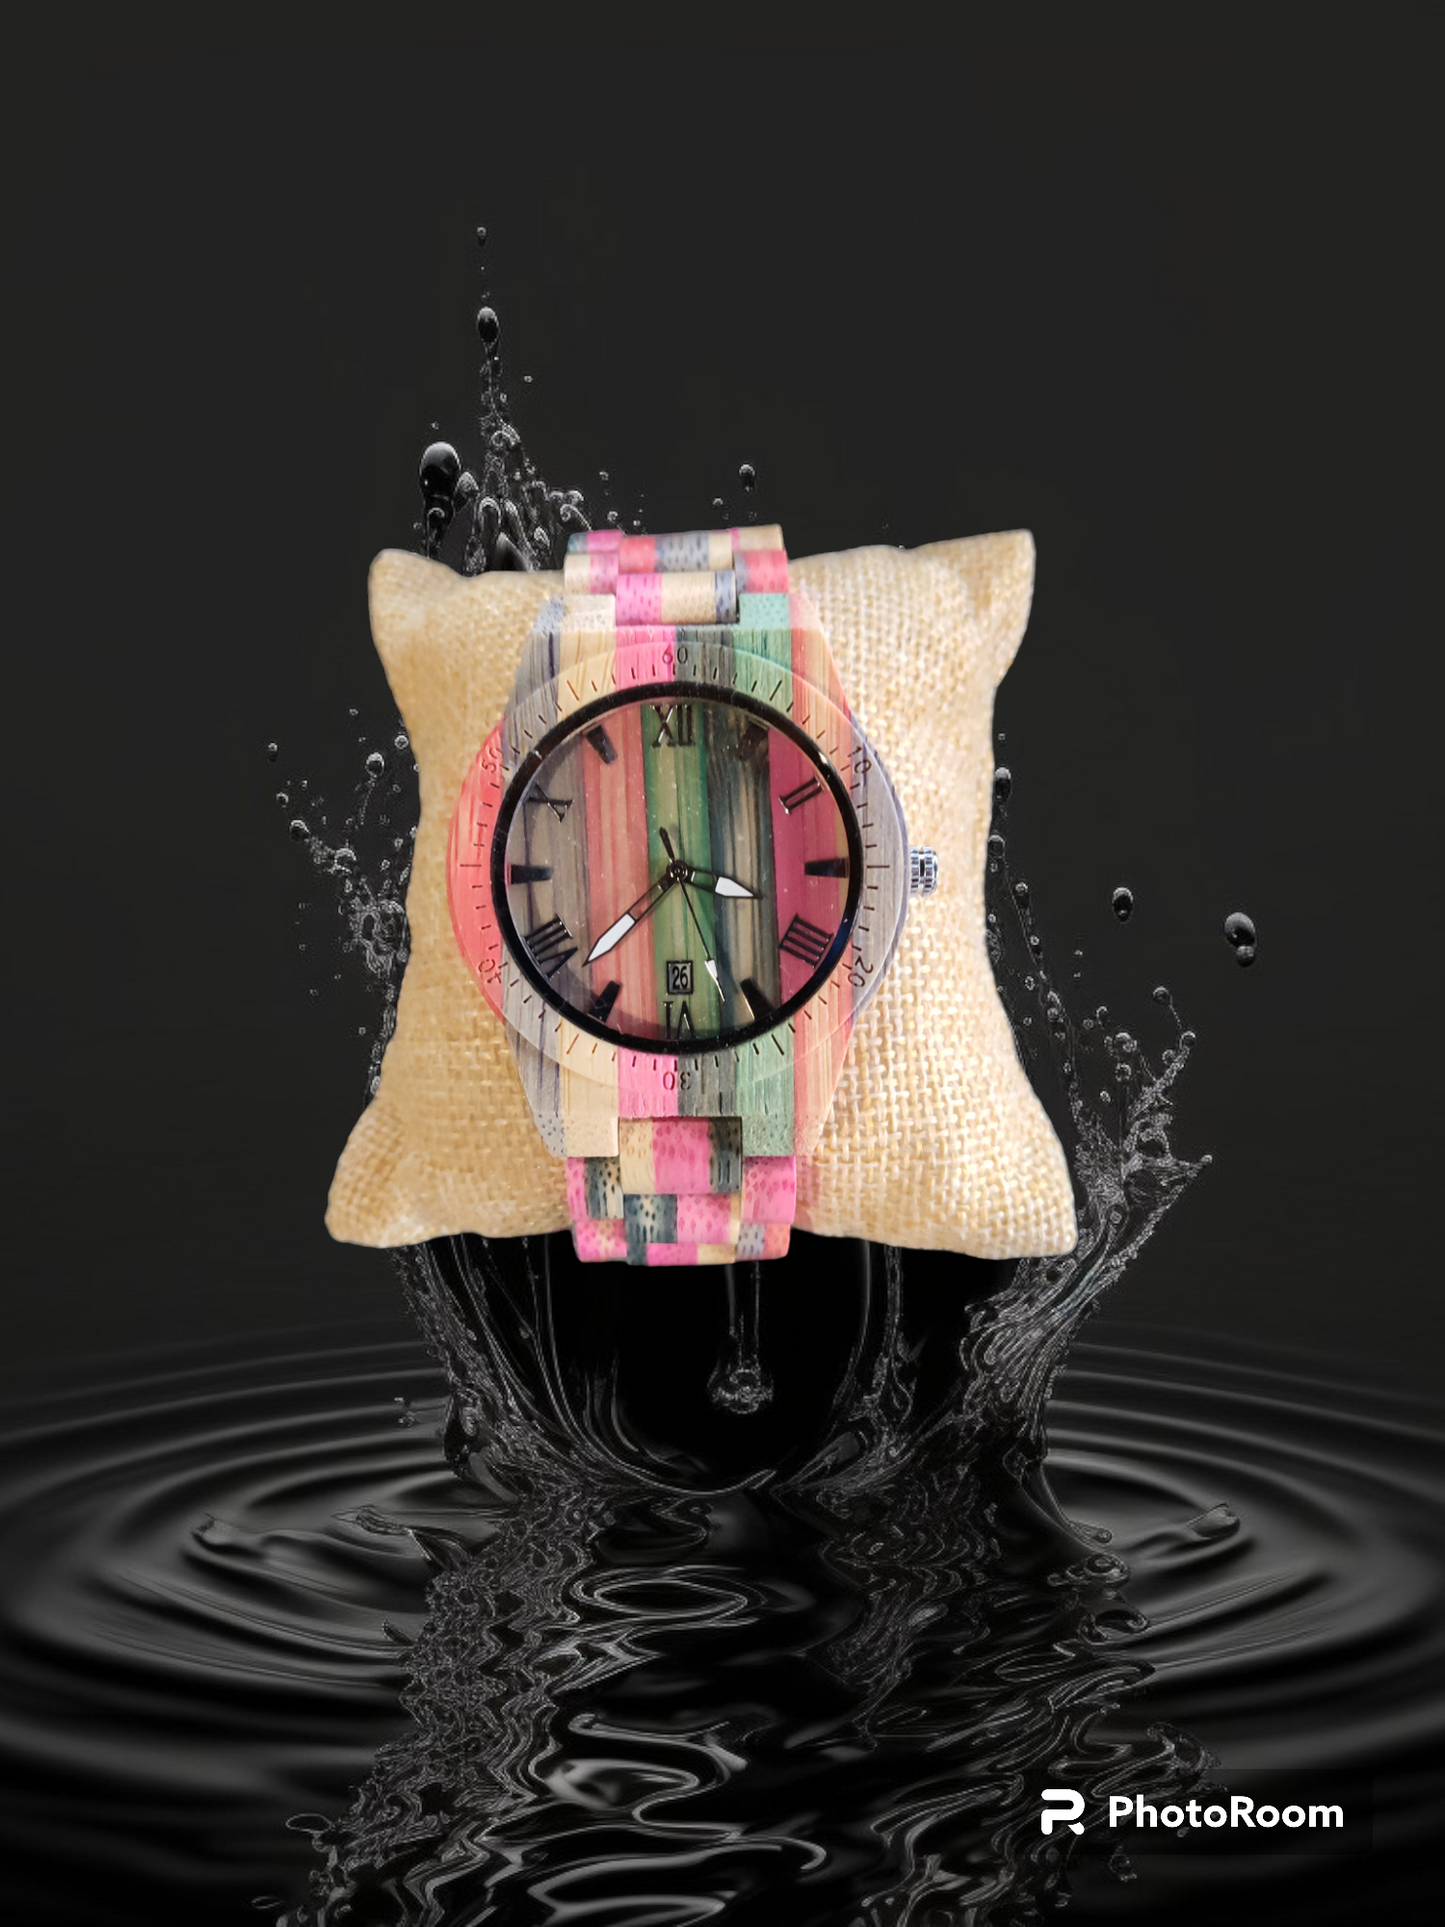 MULTI-COLORED WOODEN WATCH